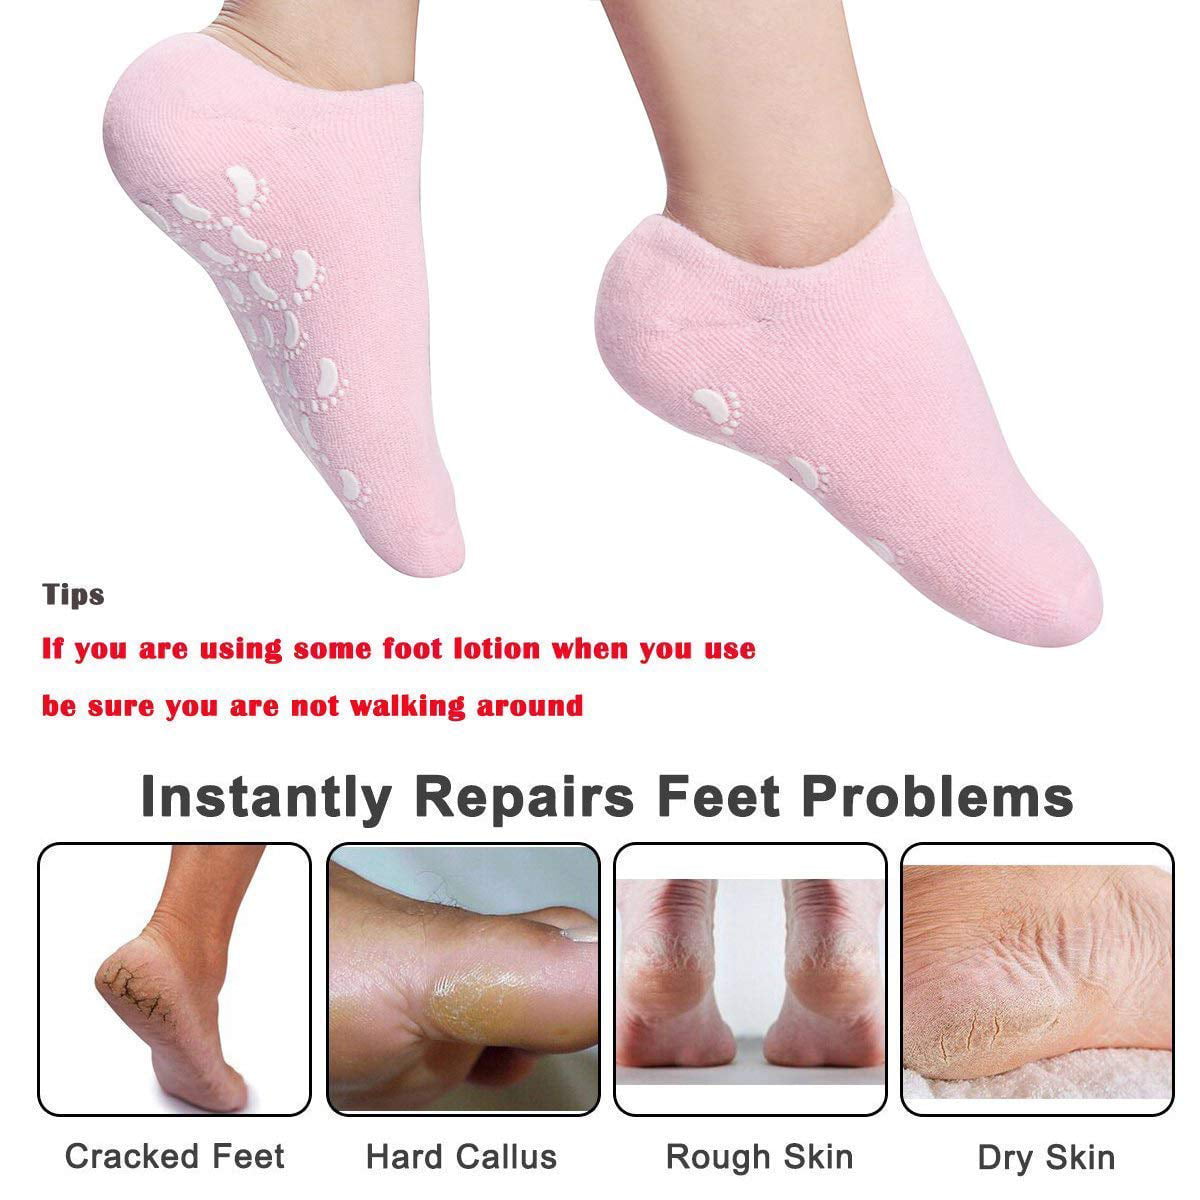 What Causes Cracked Heels? 3 Potential Causes + Treatment